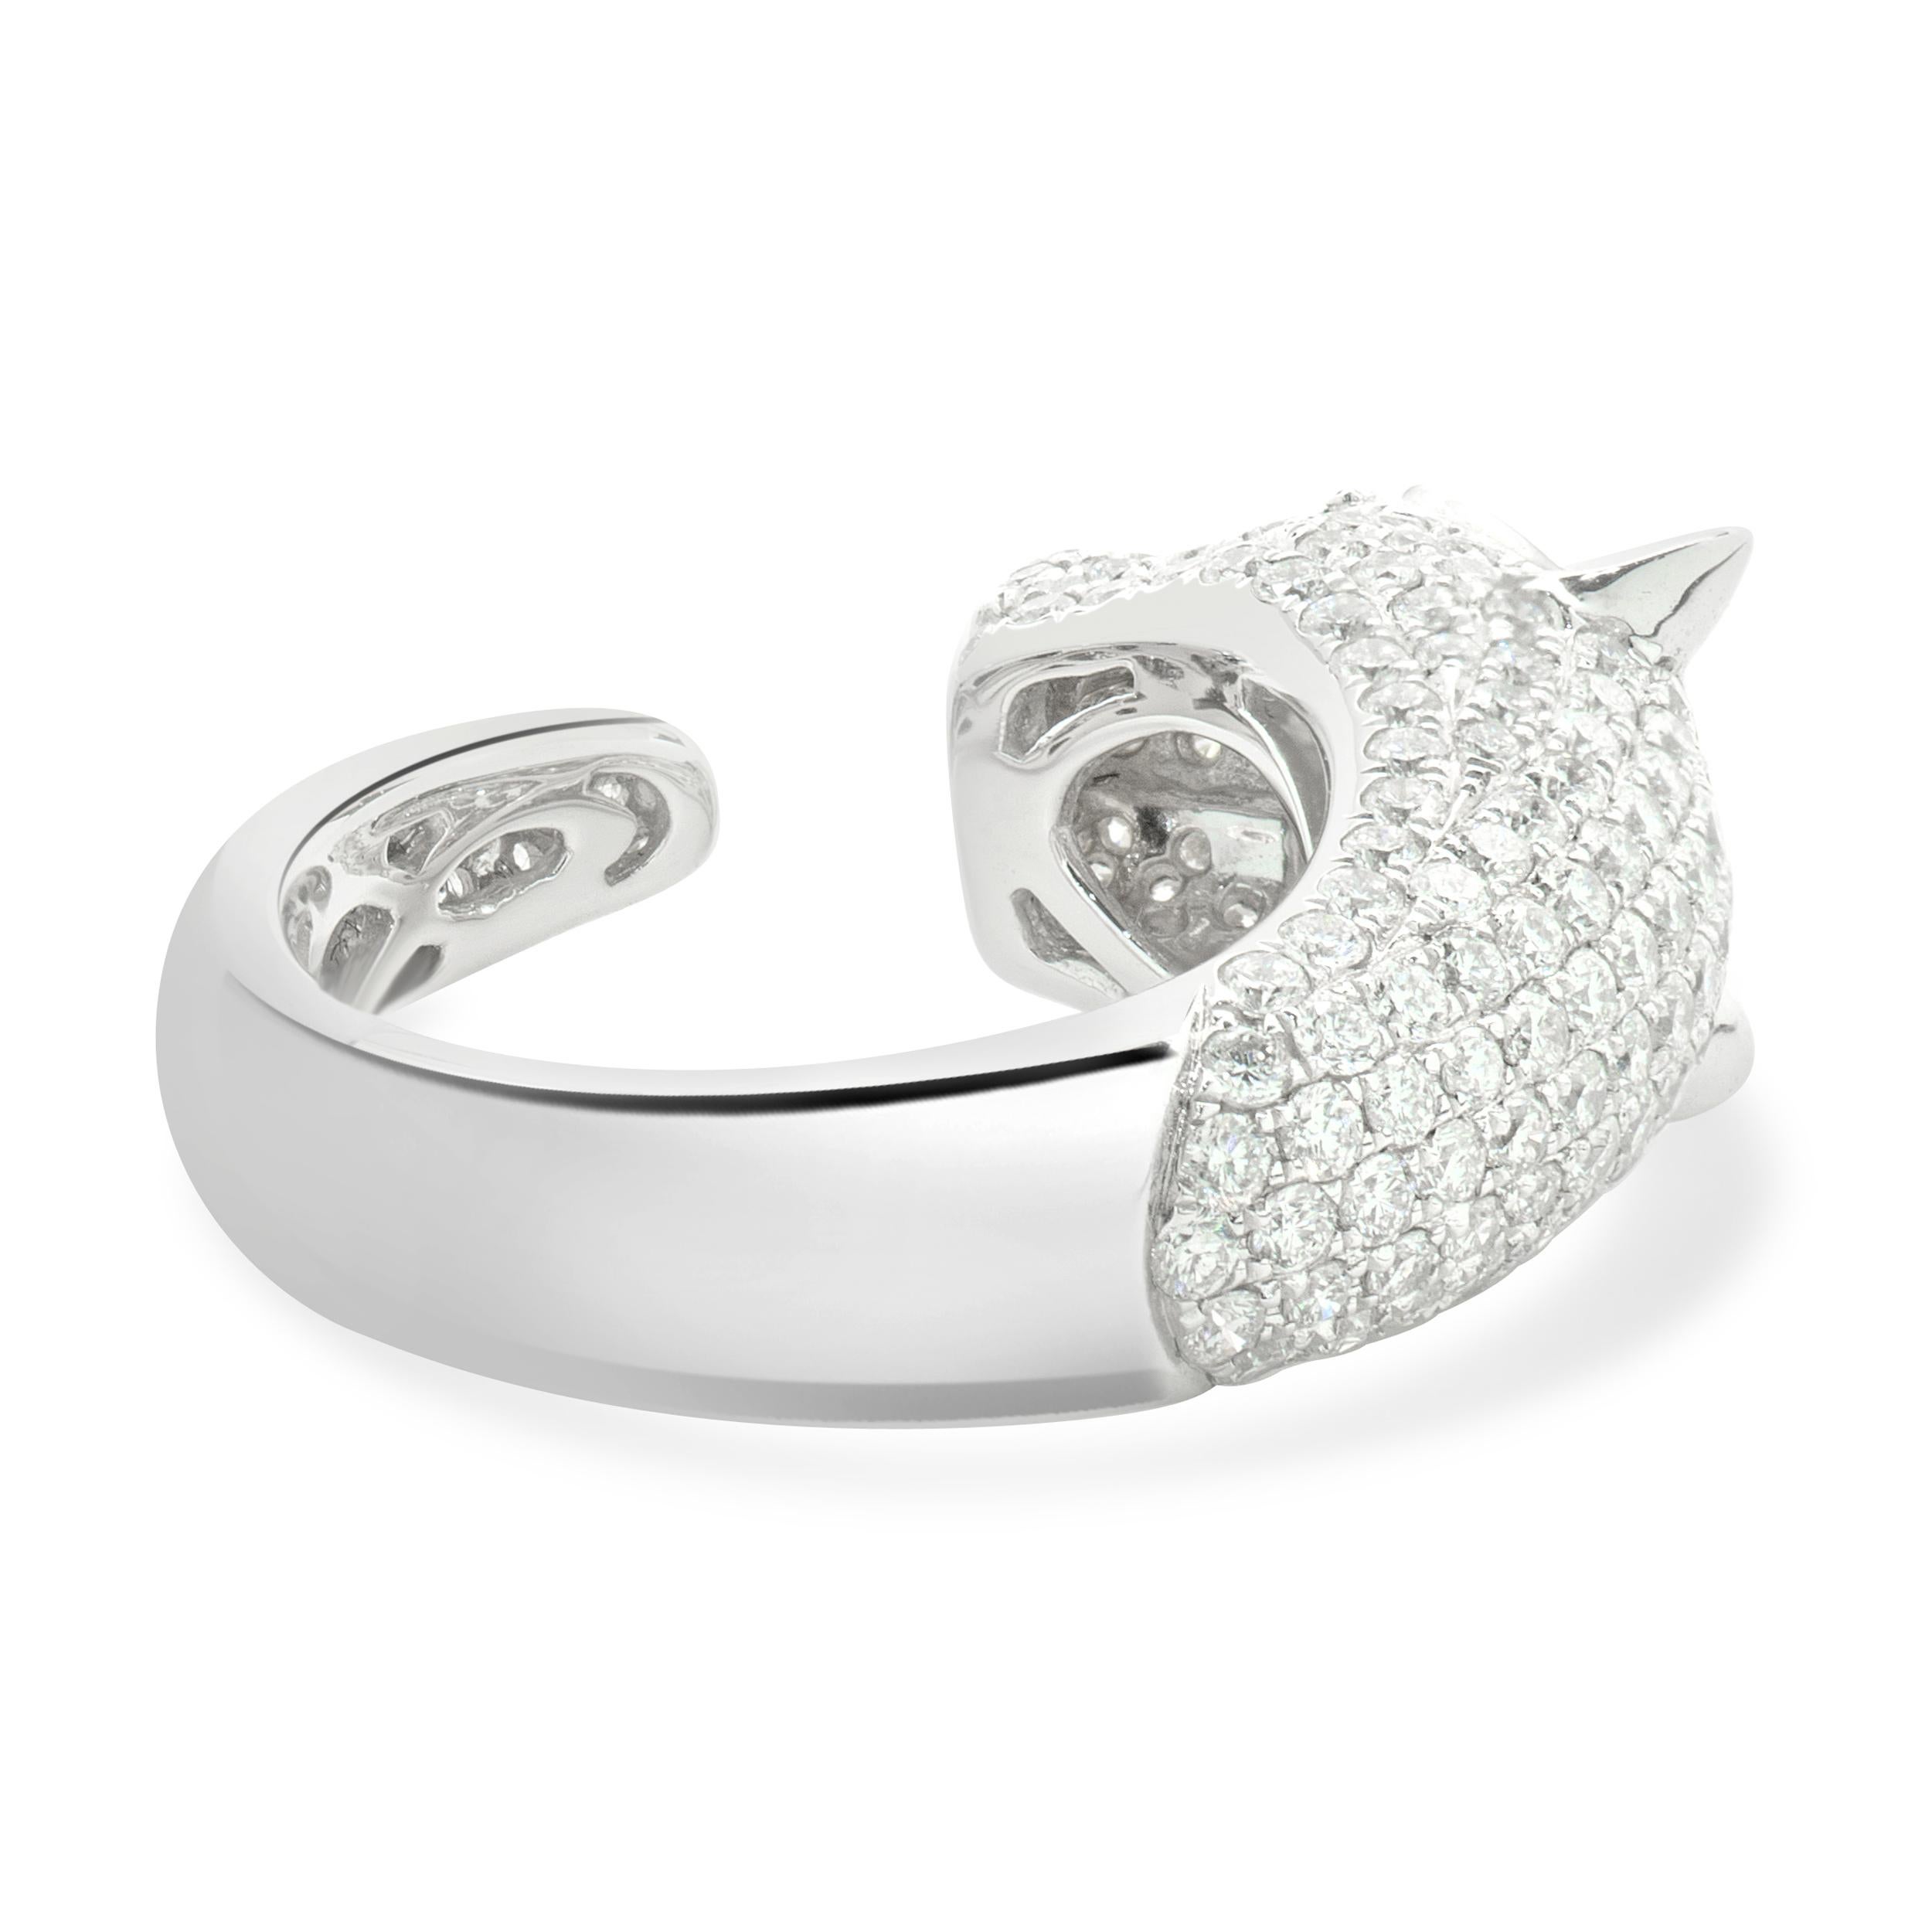 18 Karat White Gold Pave Diamond Panther Ring In Excellent Condition For Sale In Scottsdale, AZ